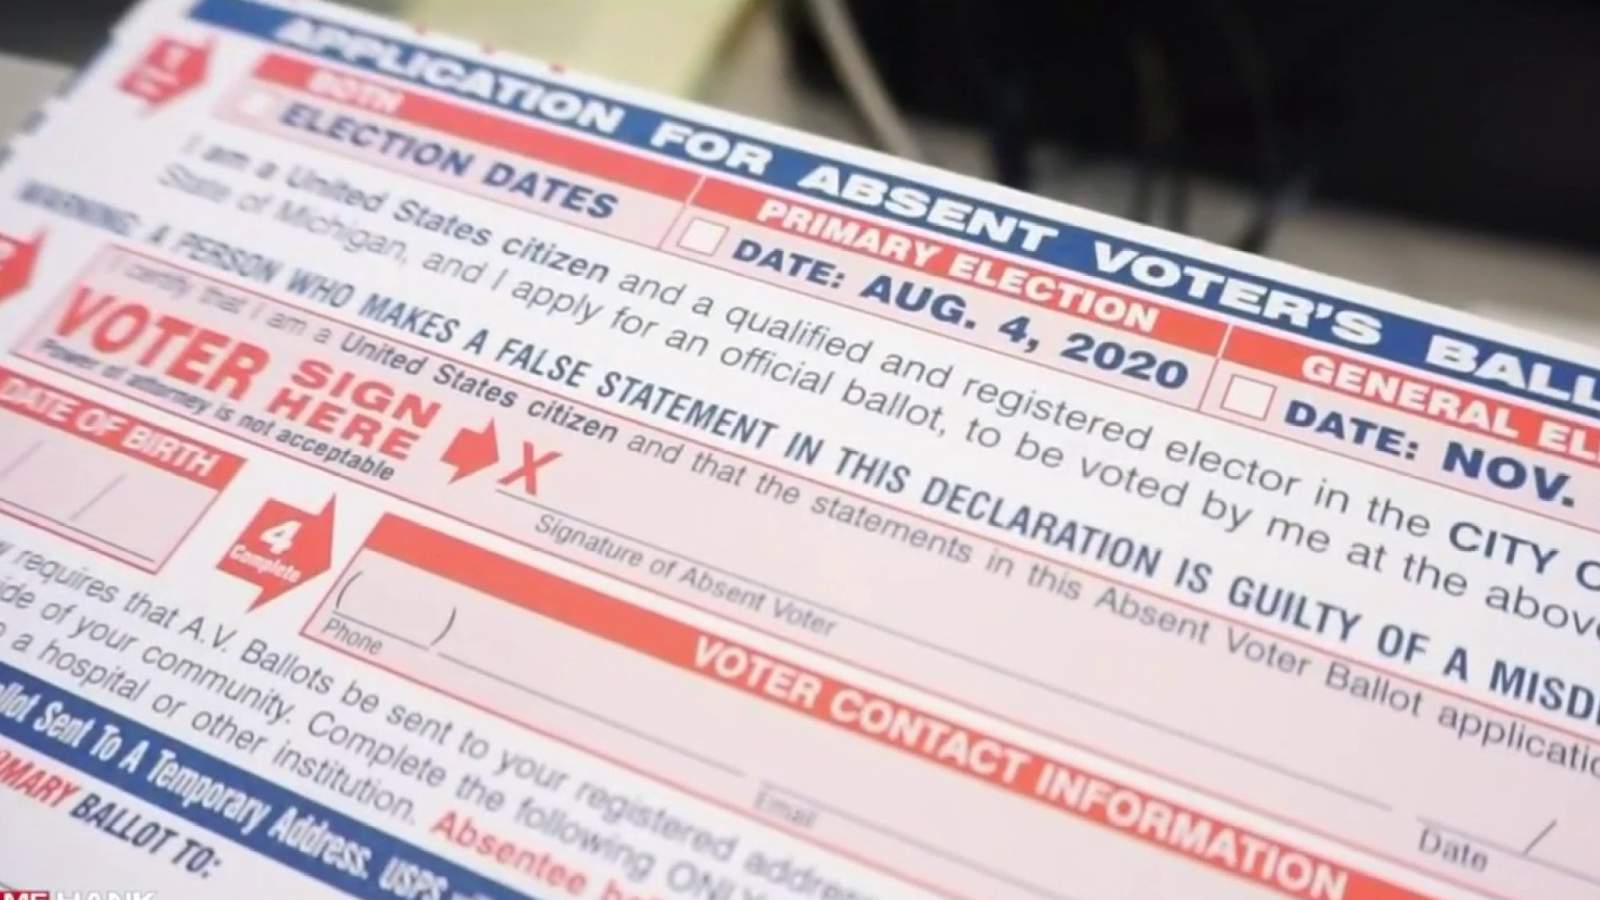 Police warn of election scam involving ‘group of activists’ going door-to-door to collect ballots